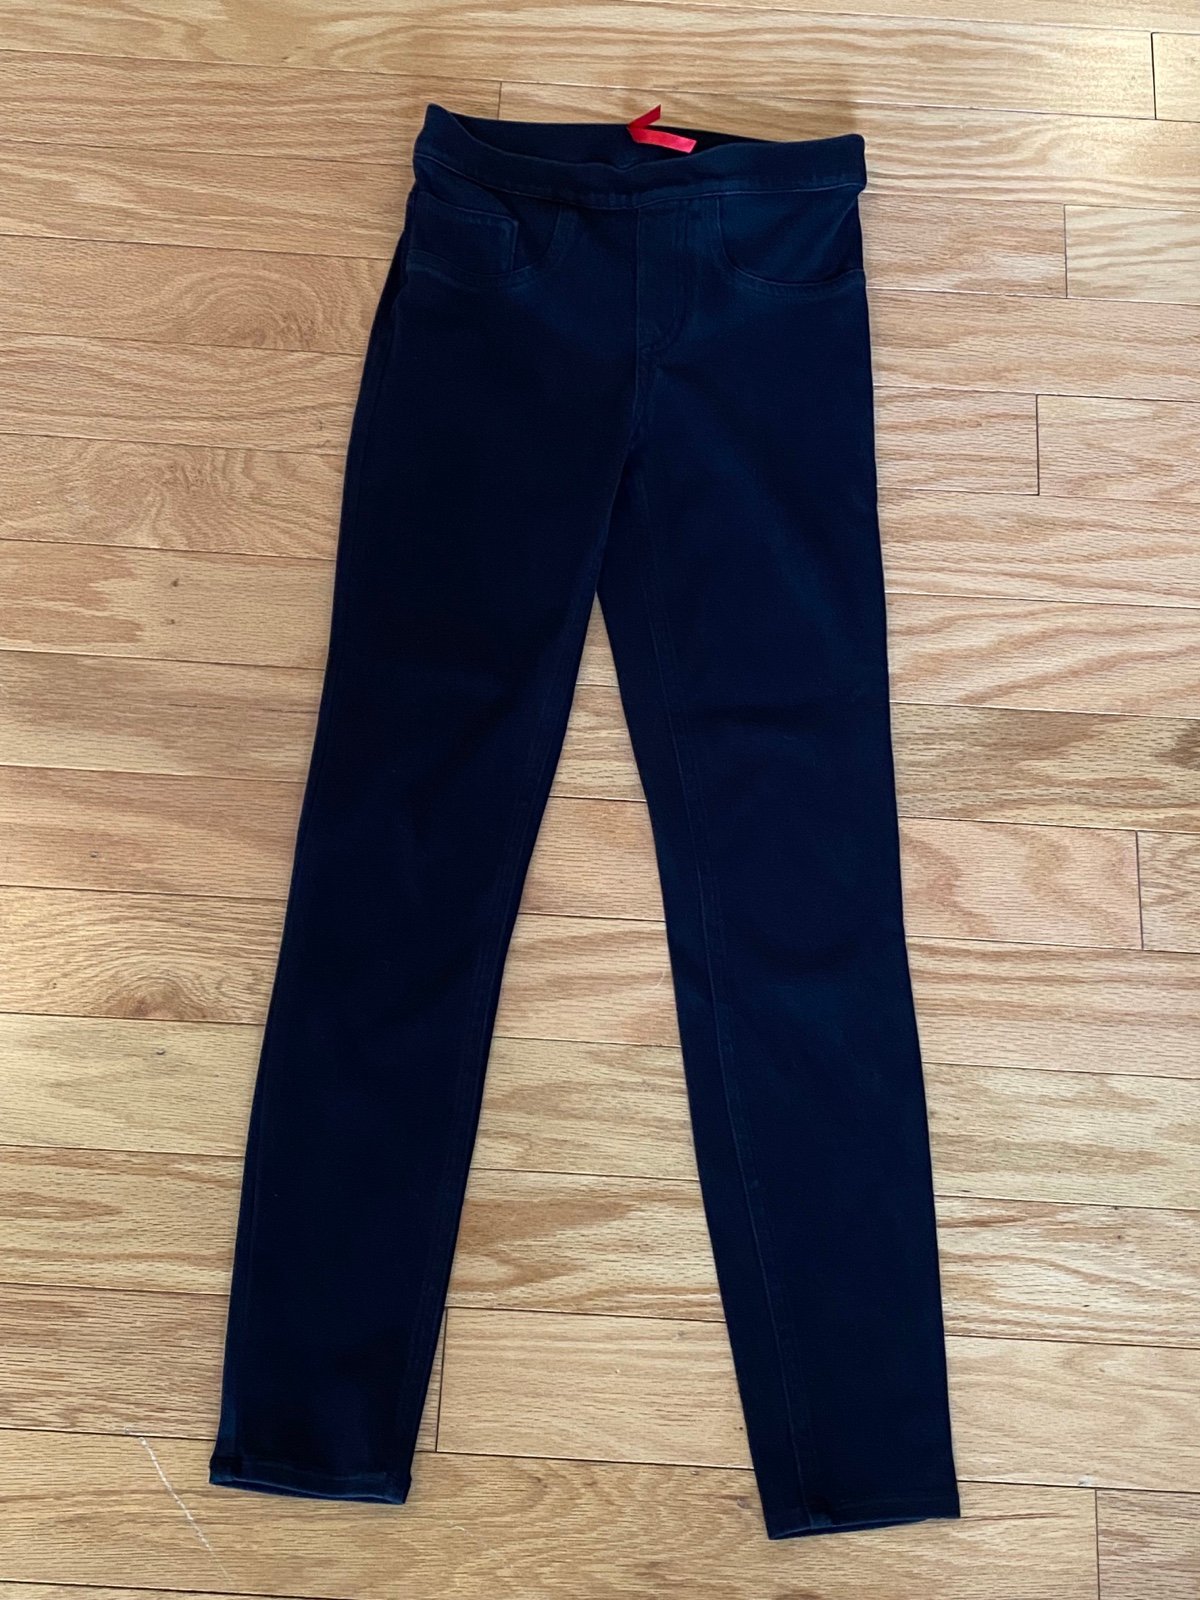 Affordable Spanx Jean-ish Ankle Pull On Leggings Jeggings Black Womens size XS Jeans Pants OW9ffBYq0 just for you